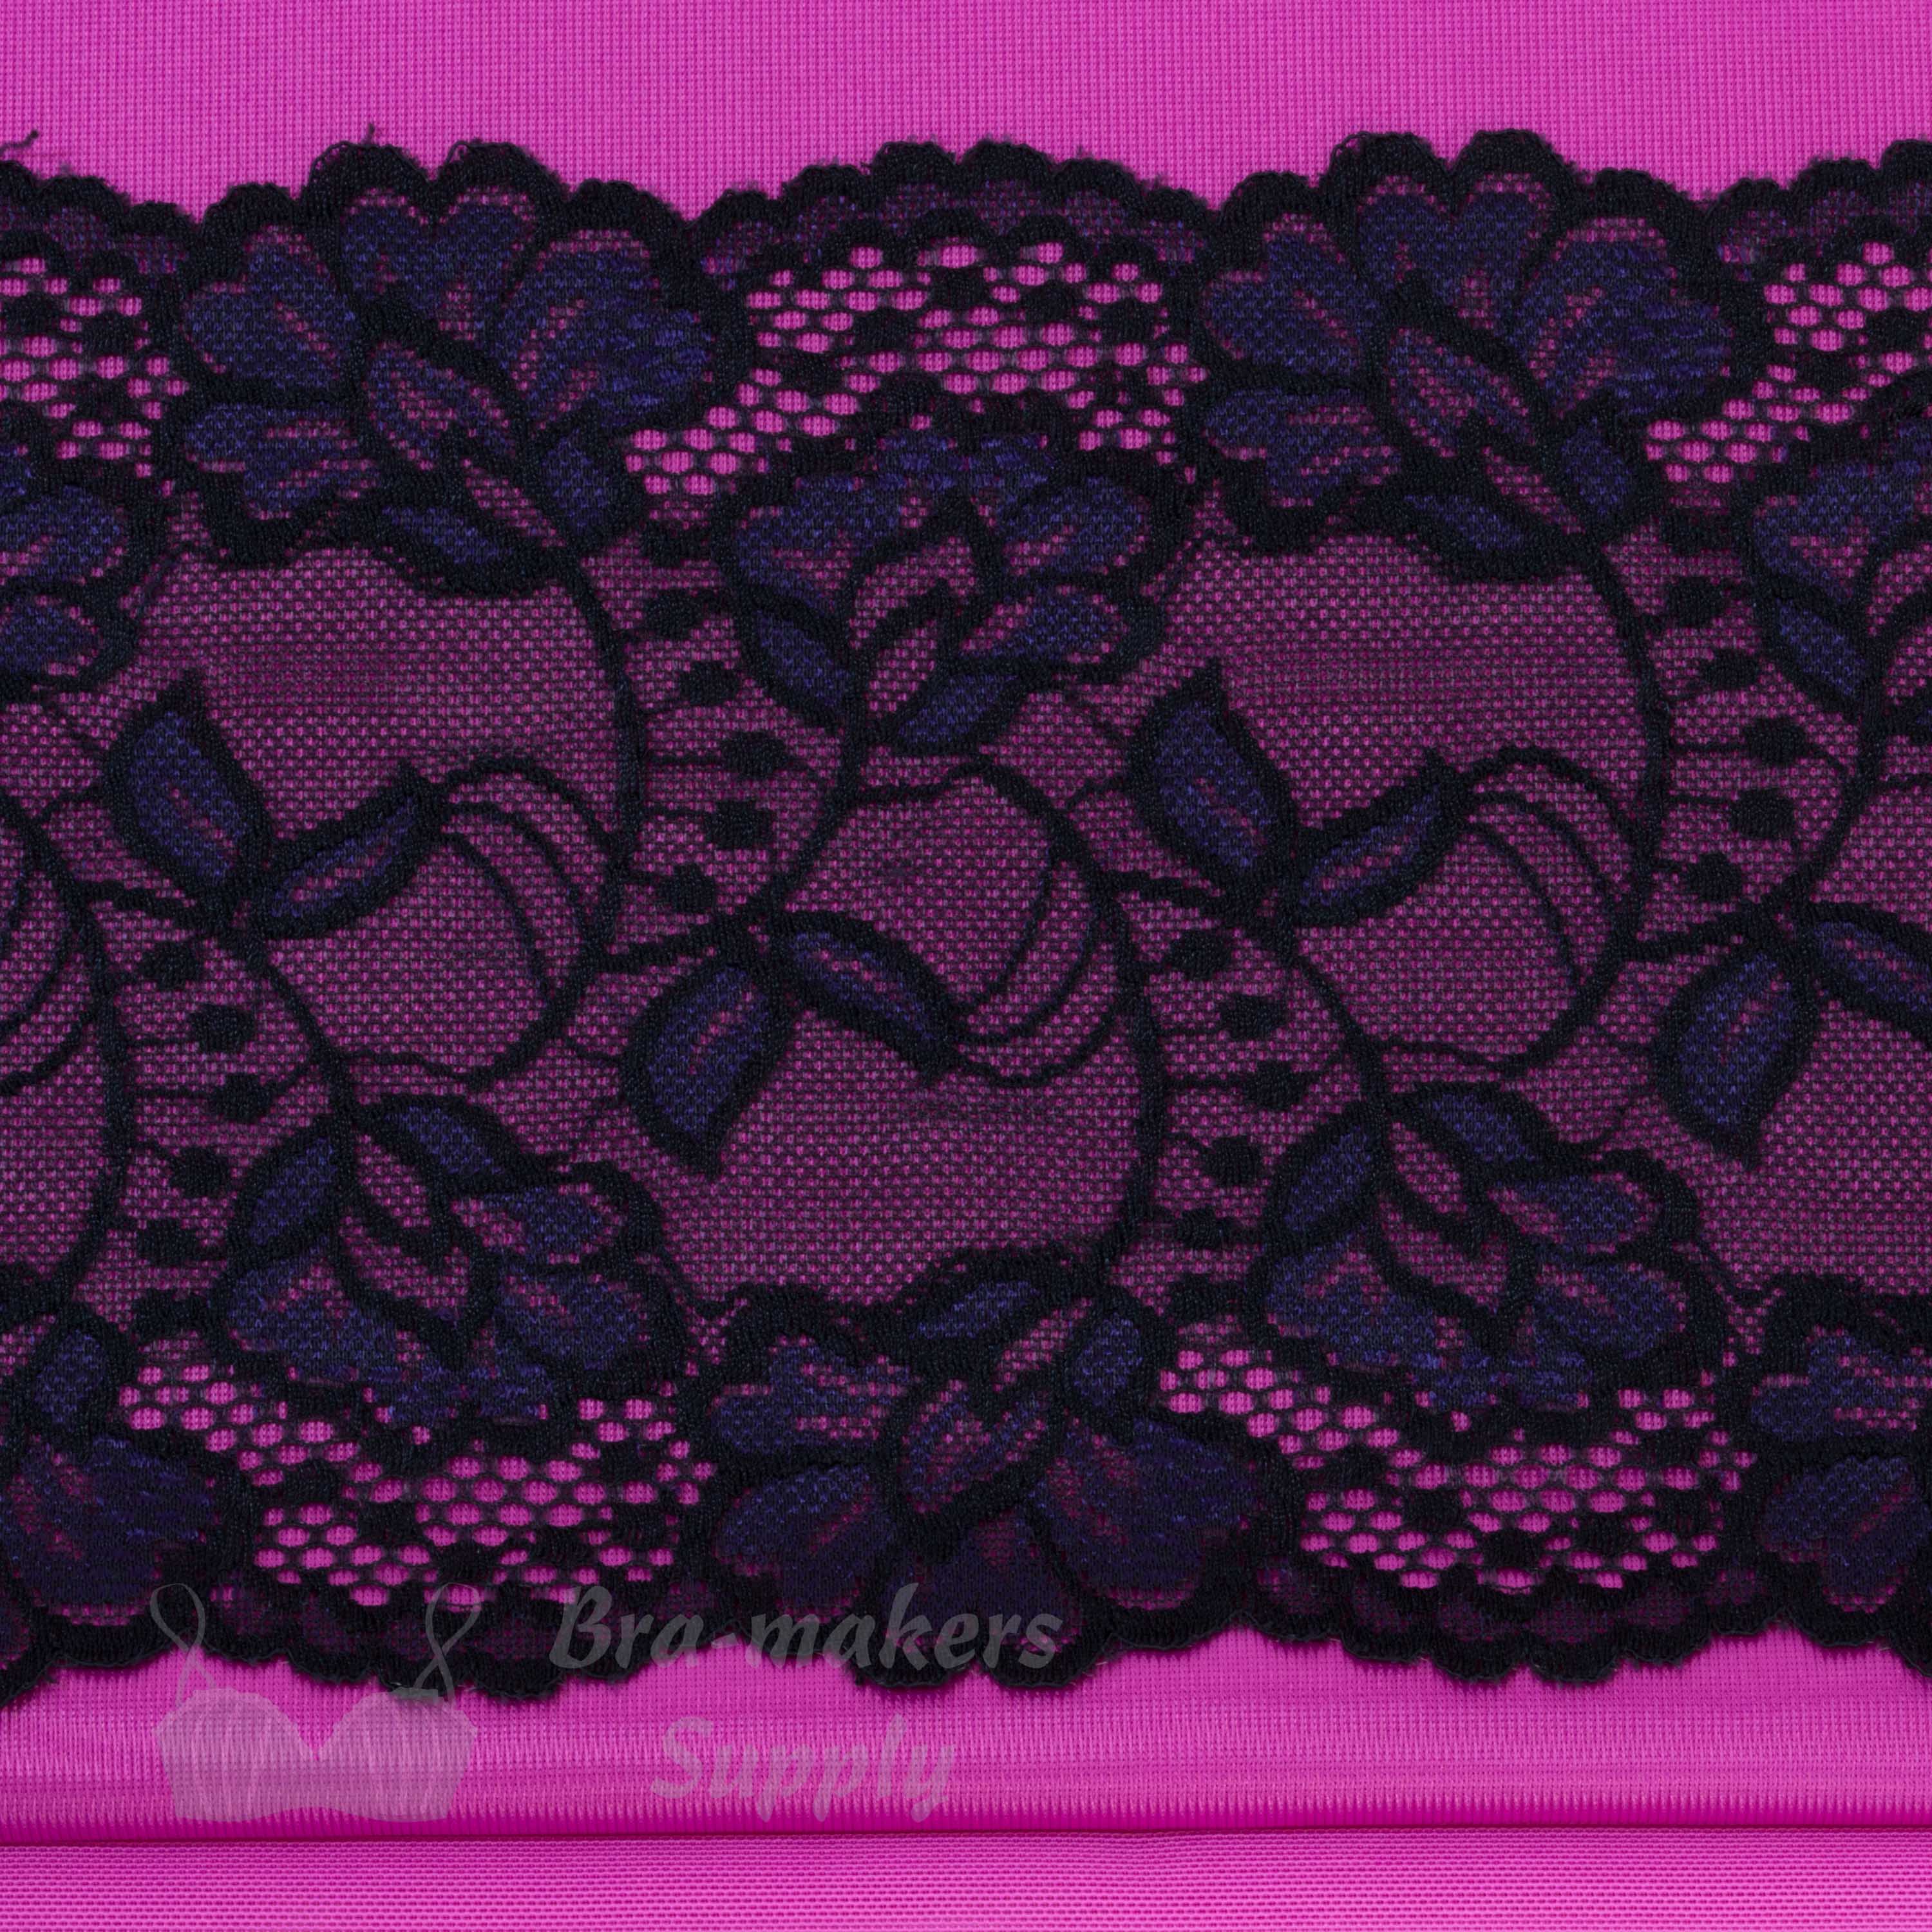 fuchsia trio bra fabrics pack with black purple floral stretch lace KT-45-LS-63.9857 from Bra-Makers Supply